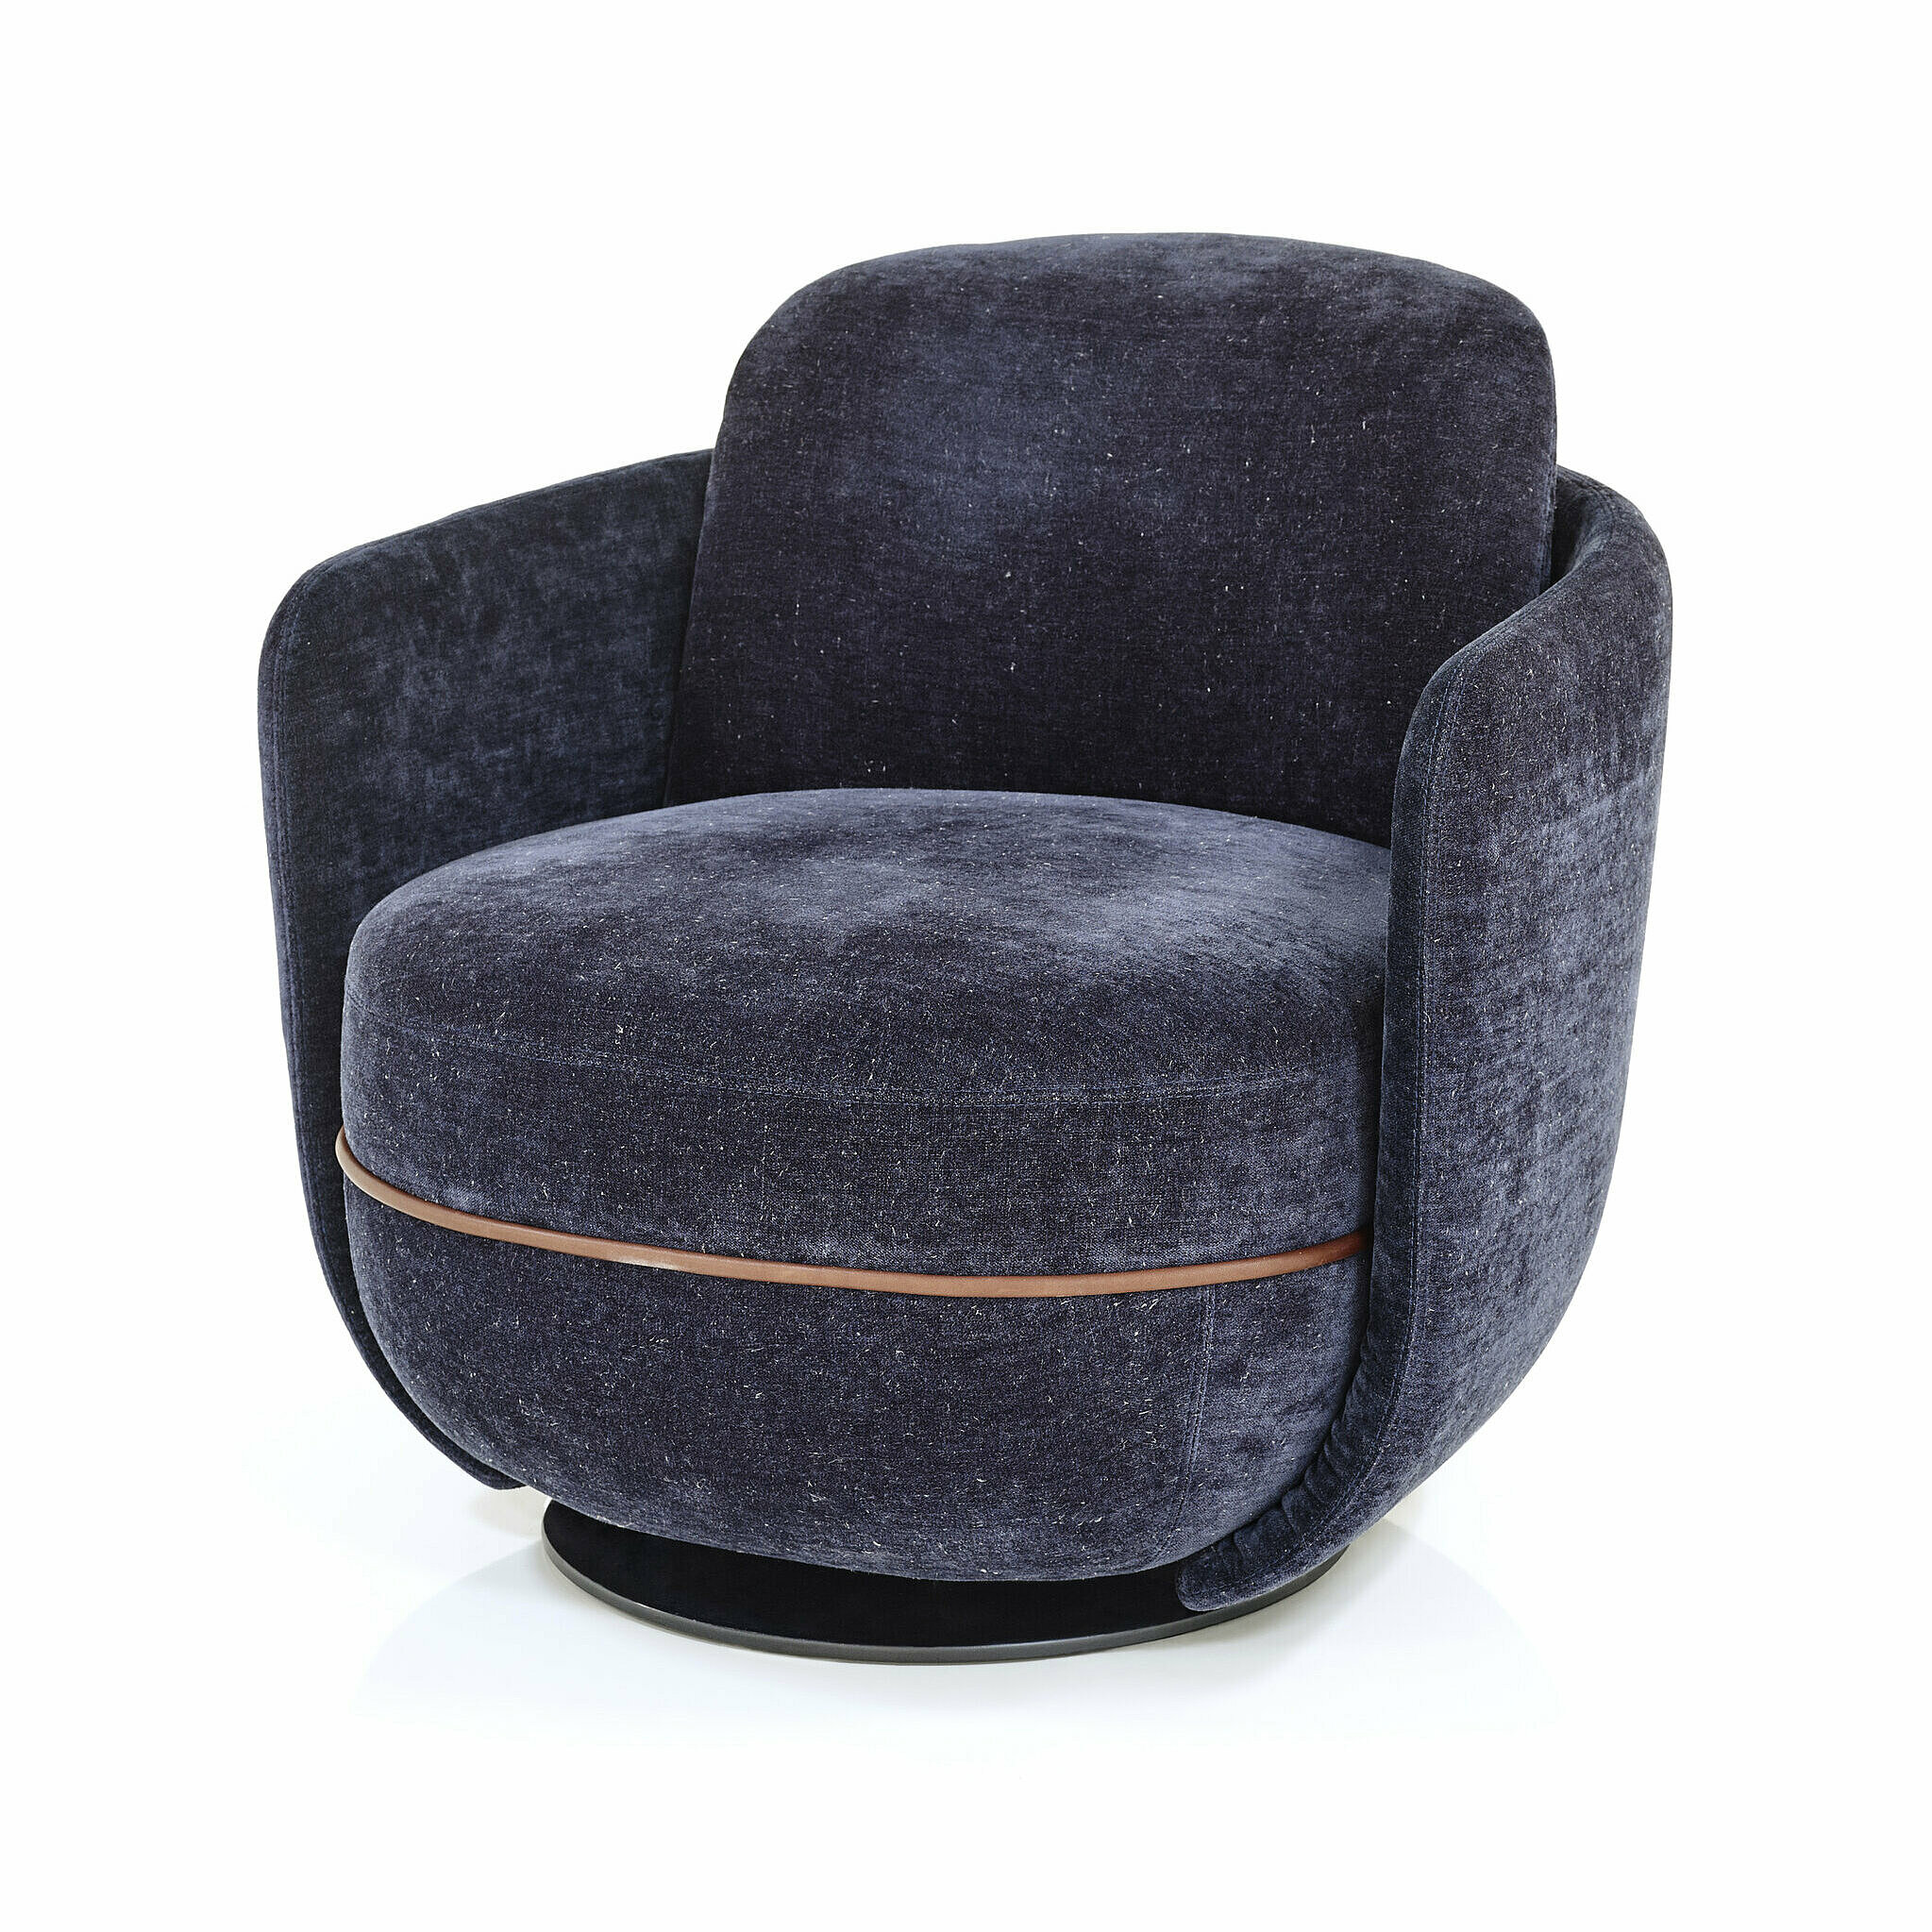 Miles armchair in a blue fabric and brown piping. Base is a black turntable